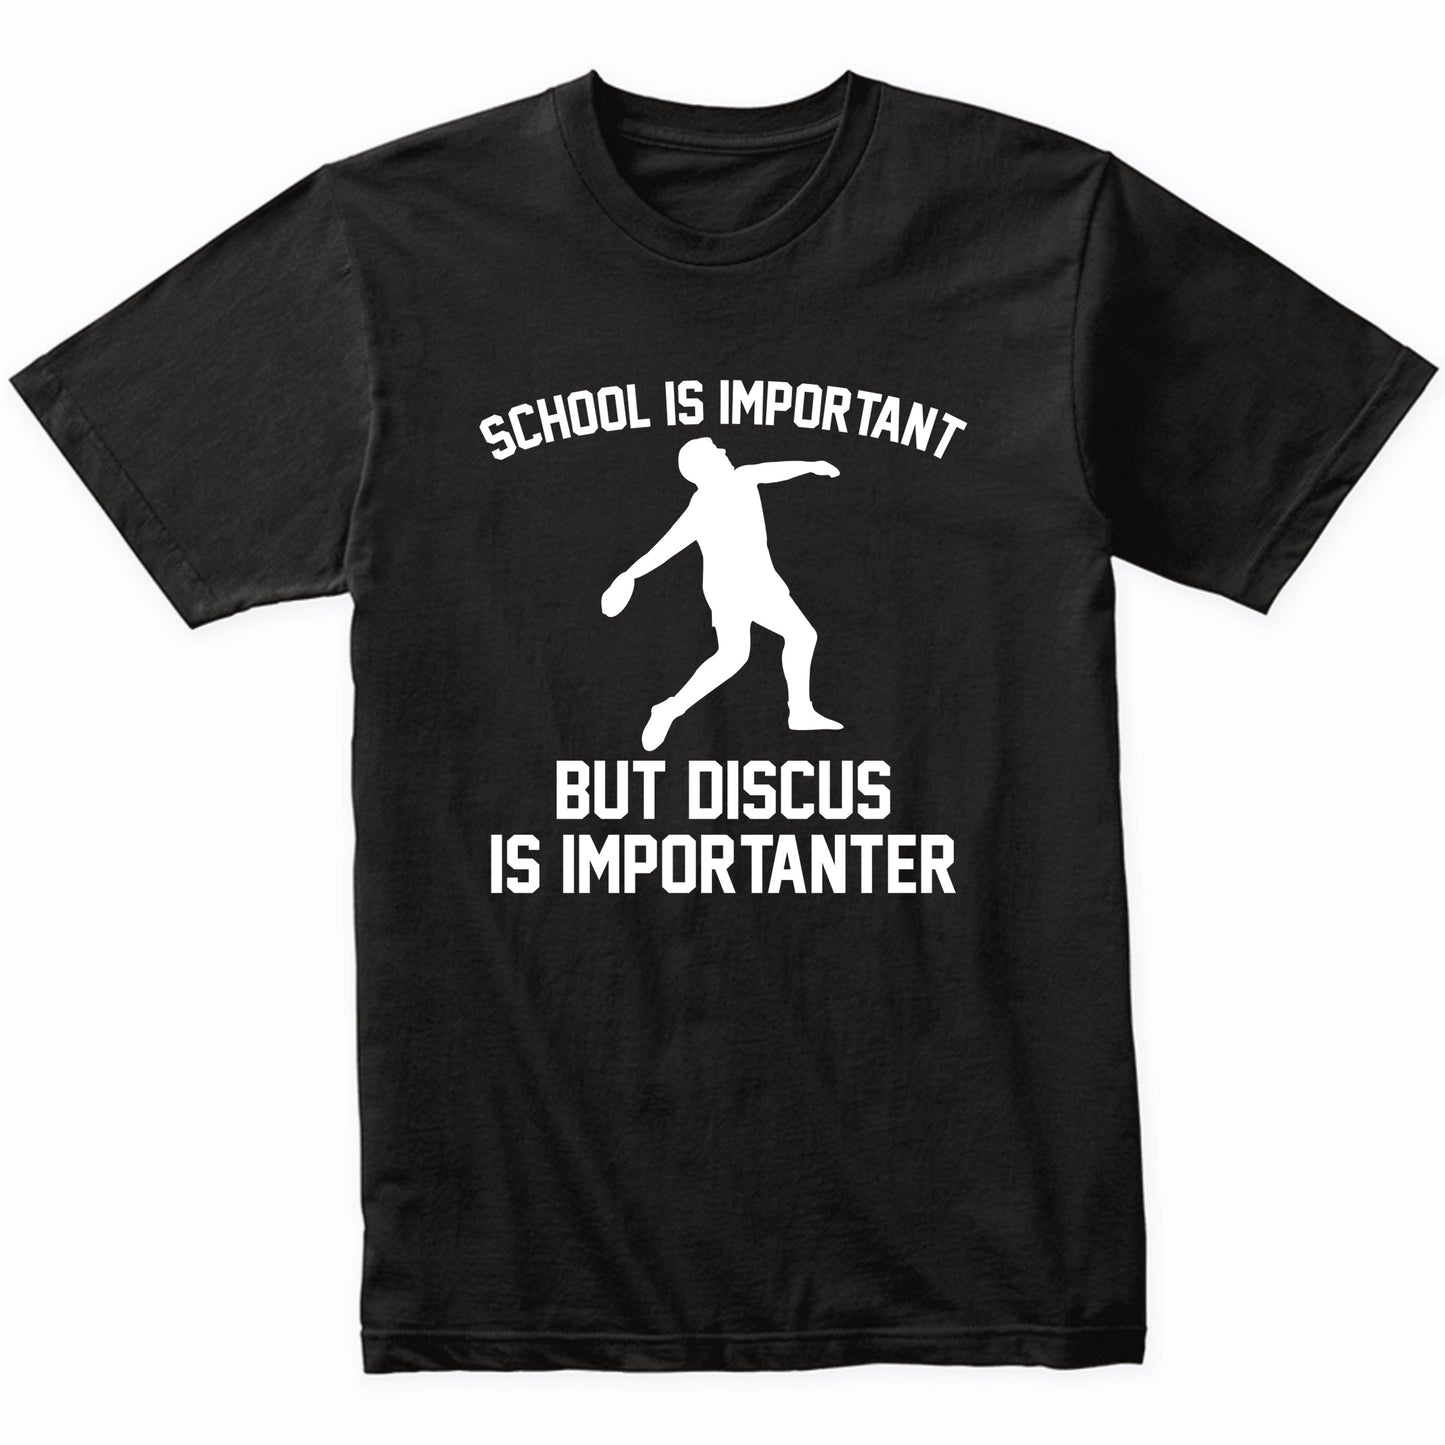 School Is Important But Discus Is Importanter Funny Shirt